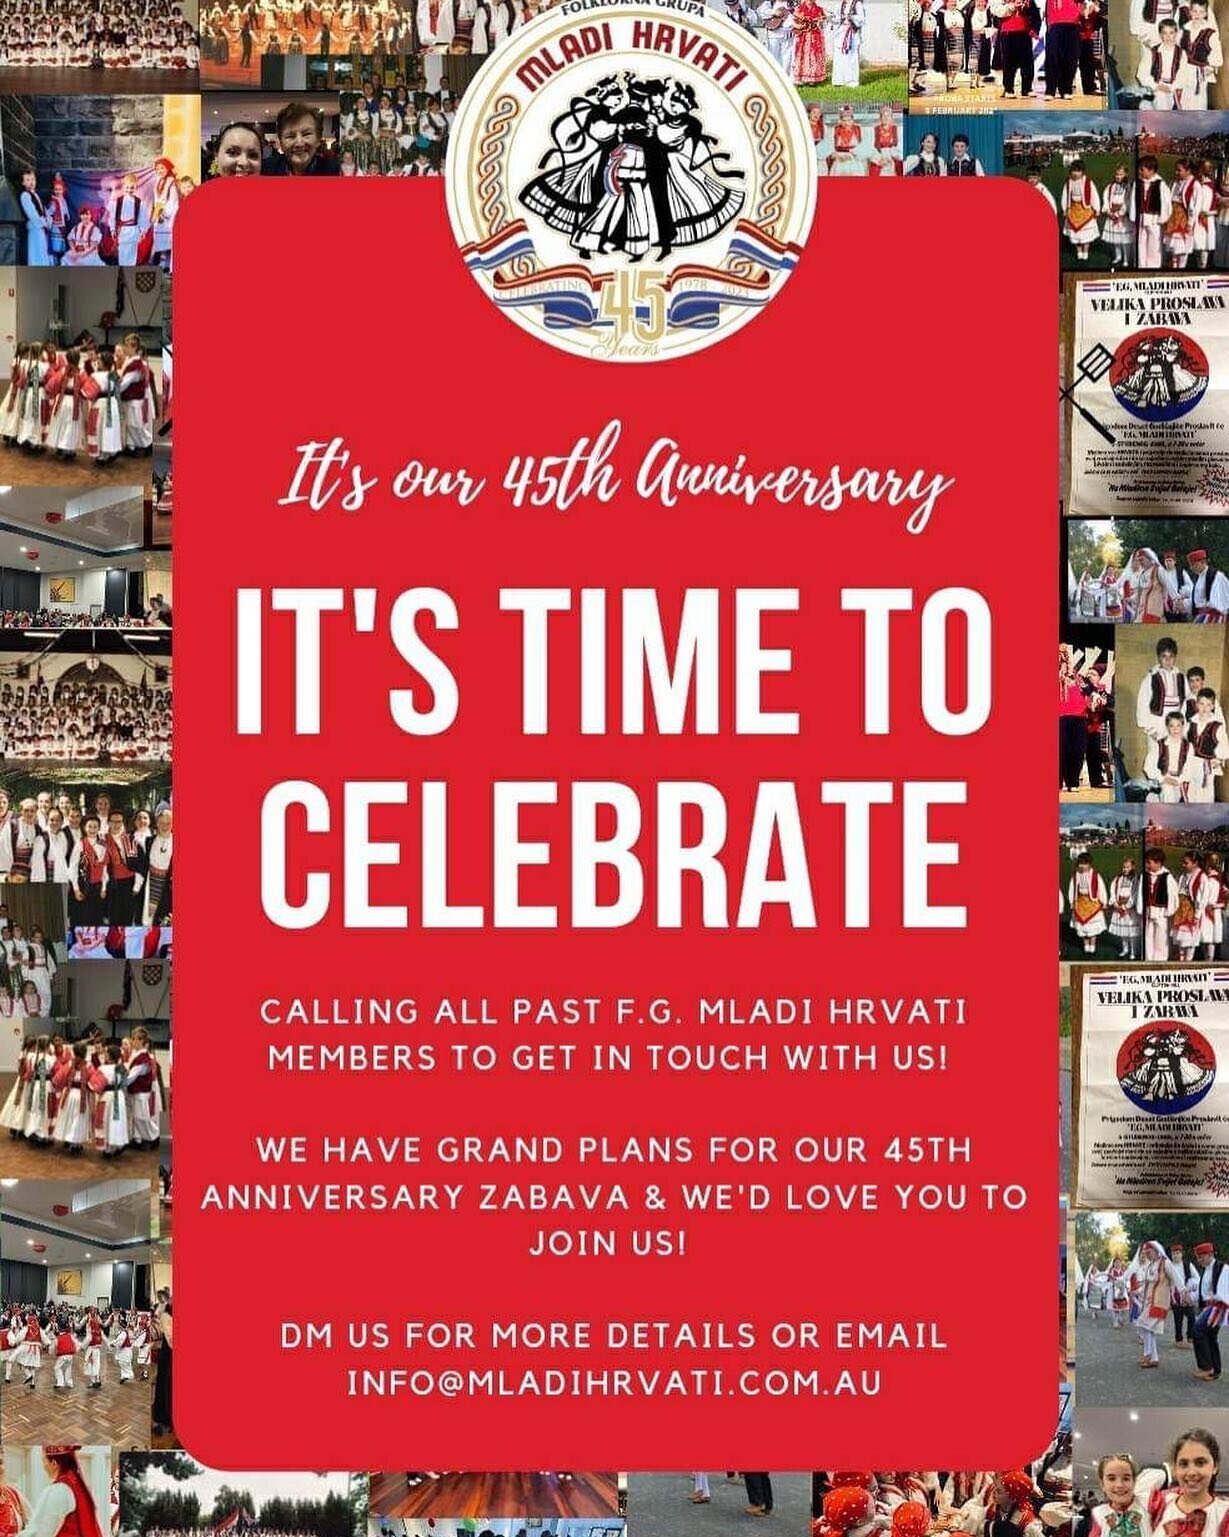 🗣️🚨ATTENTION

Calling all past Mladi Hrvati members to get in touch with us!👊

We are 4️⃣5️⃣ years young this year and we have some grand plans!🪕

Please reach out if you&rsquo;d like to re-live your youth and be a part of something spectacular! 